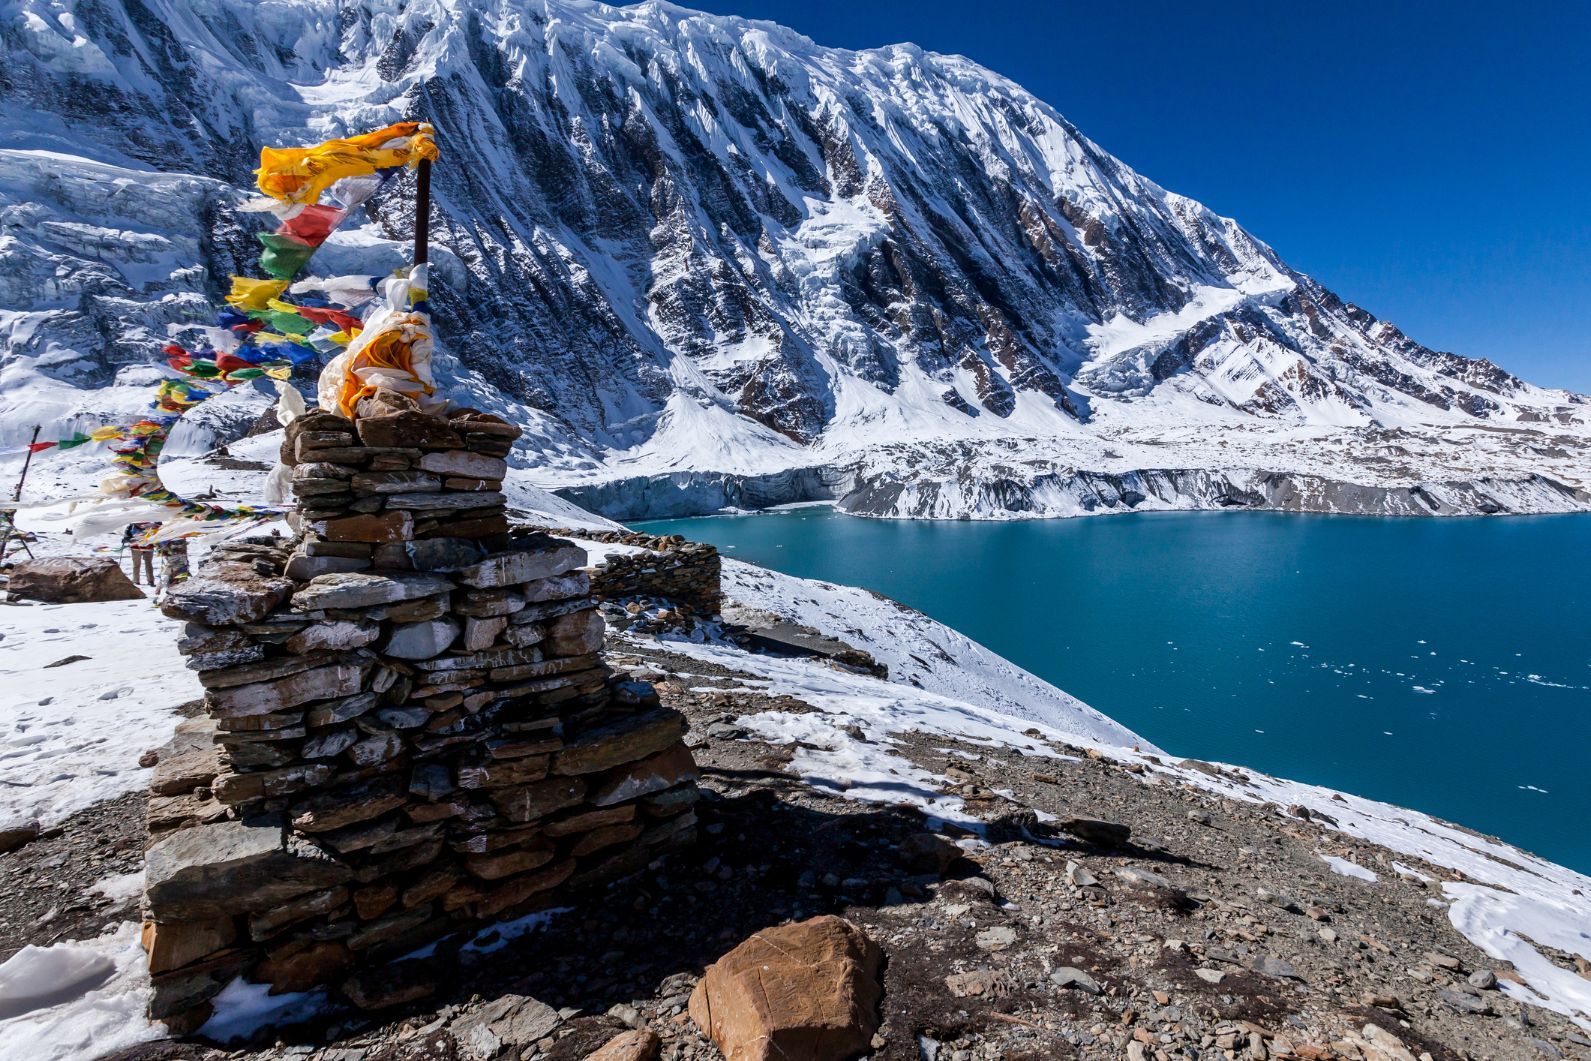 Trekking in the Annapurna Region | Lake Tilicho and the Annapurna Conservation Area